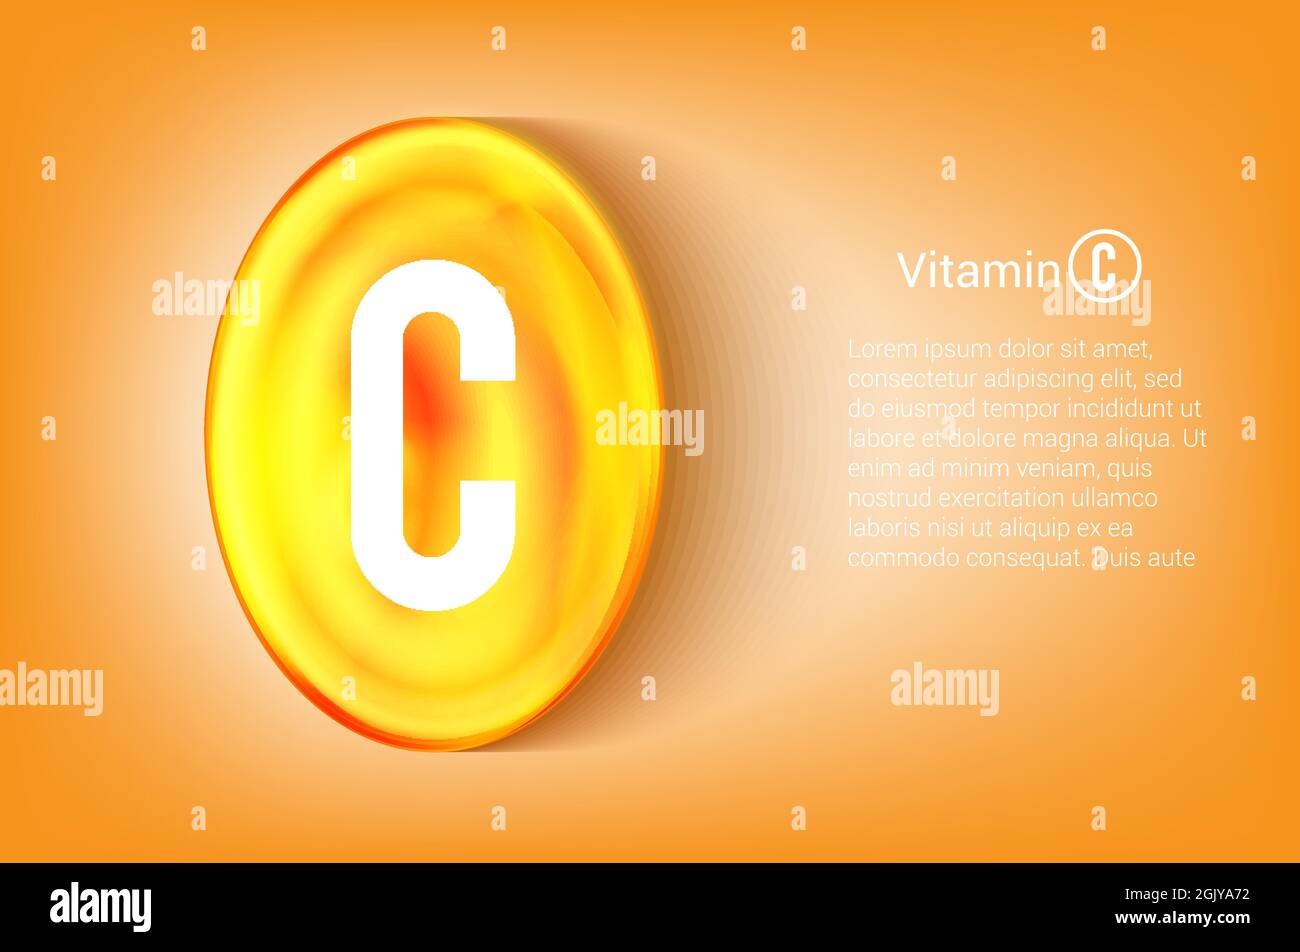 Golden capsule with vitamin C. Shining golden pill of substance. For health advertising. Stock Vector